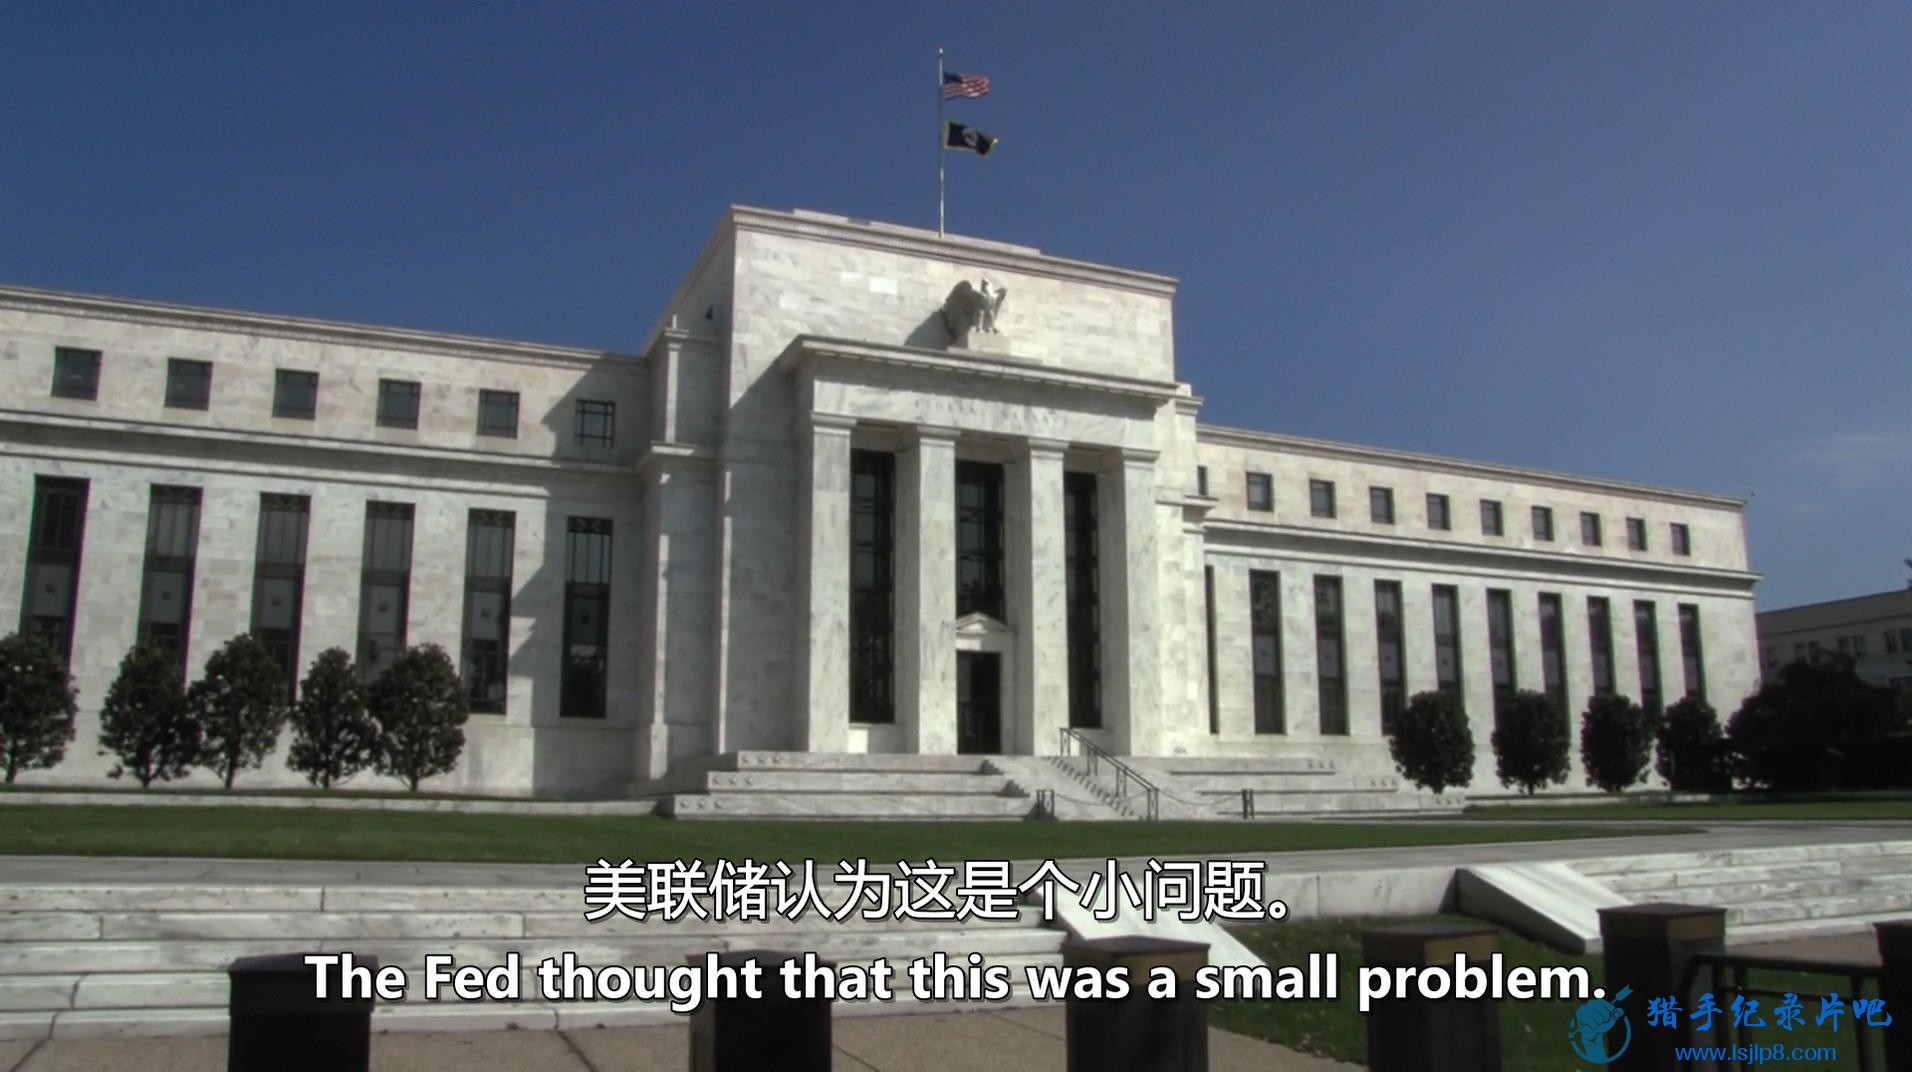 Money.for.Nothing.Inside.the.Federal.Reserve.2013.DOCU.1080p.WEB-DL.DD5.1.H264-FGT.jpg